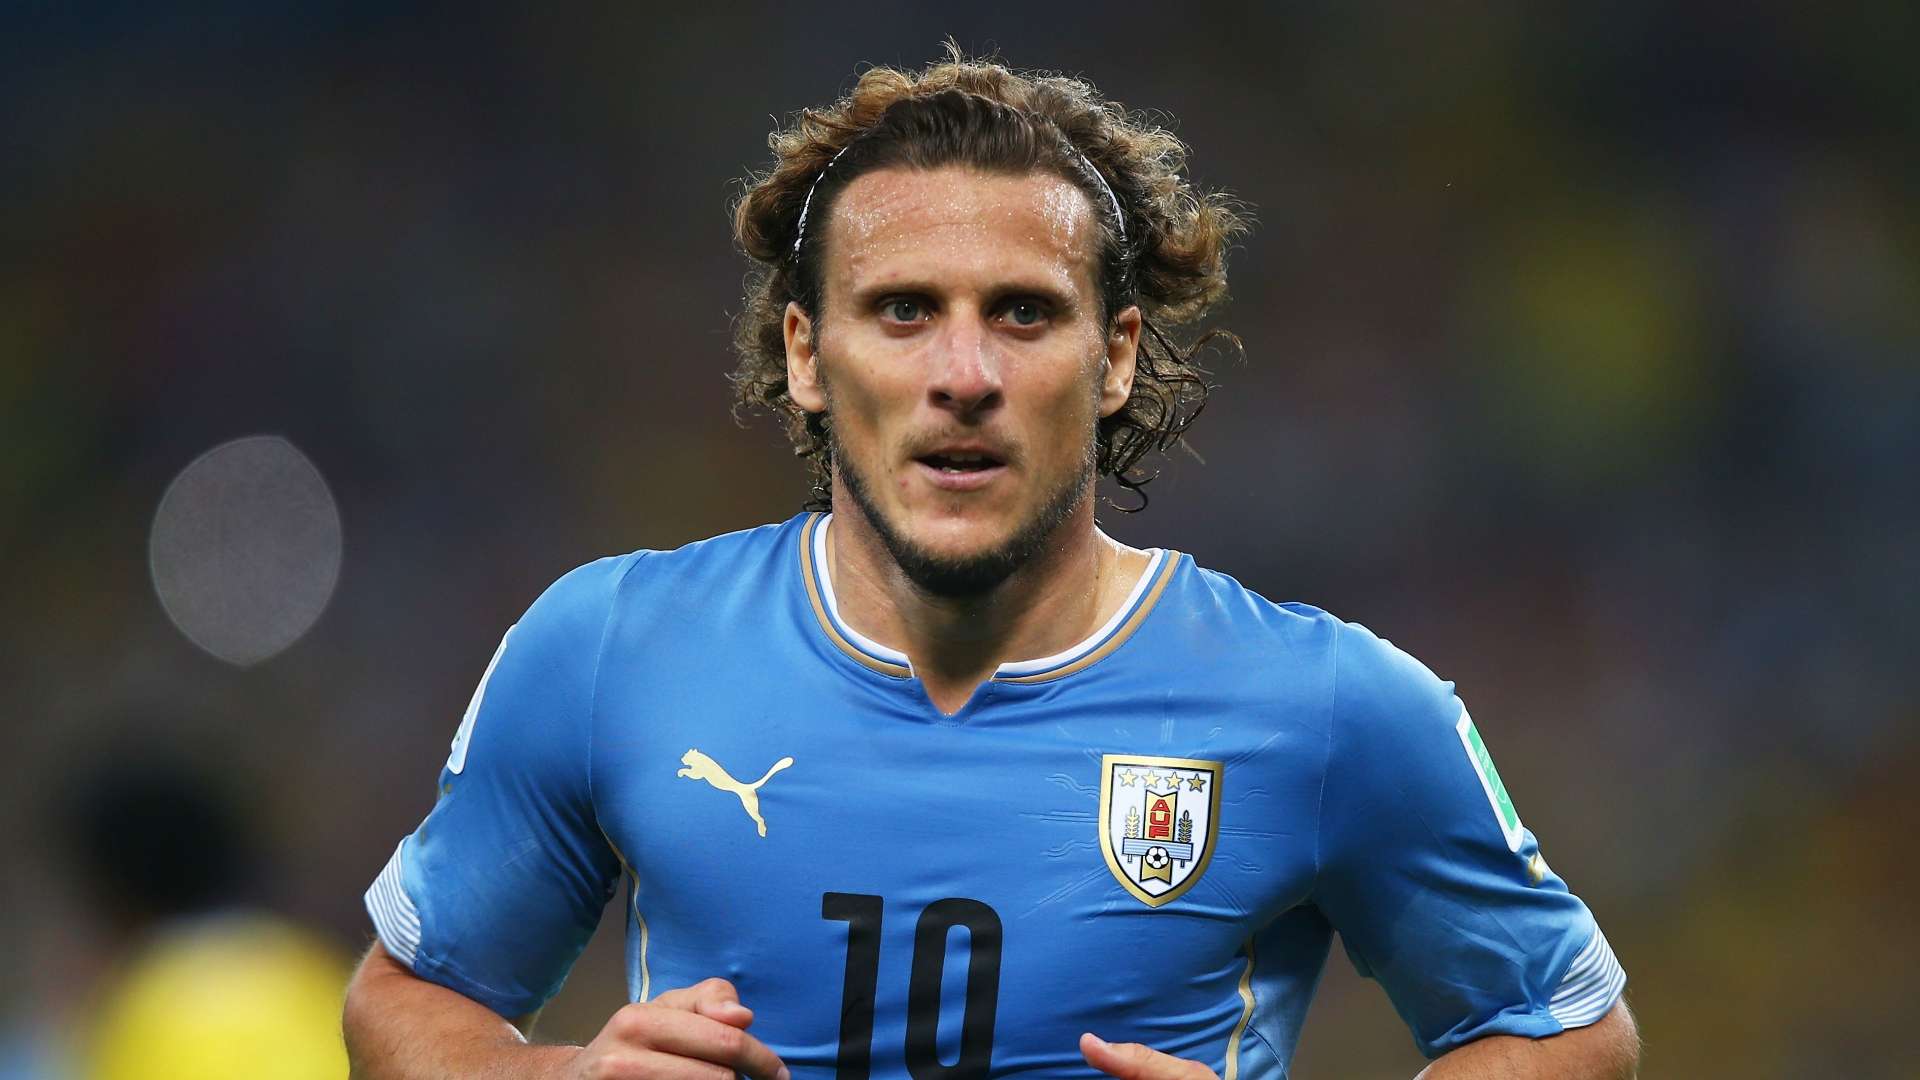 Diego Forlan Colombia v Uruguay World Cup 28062014